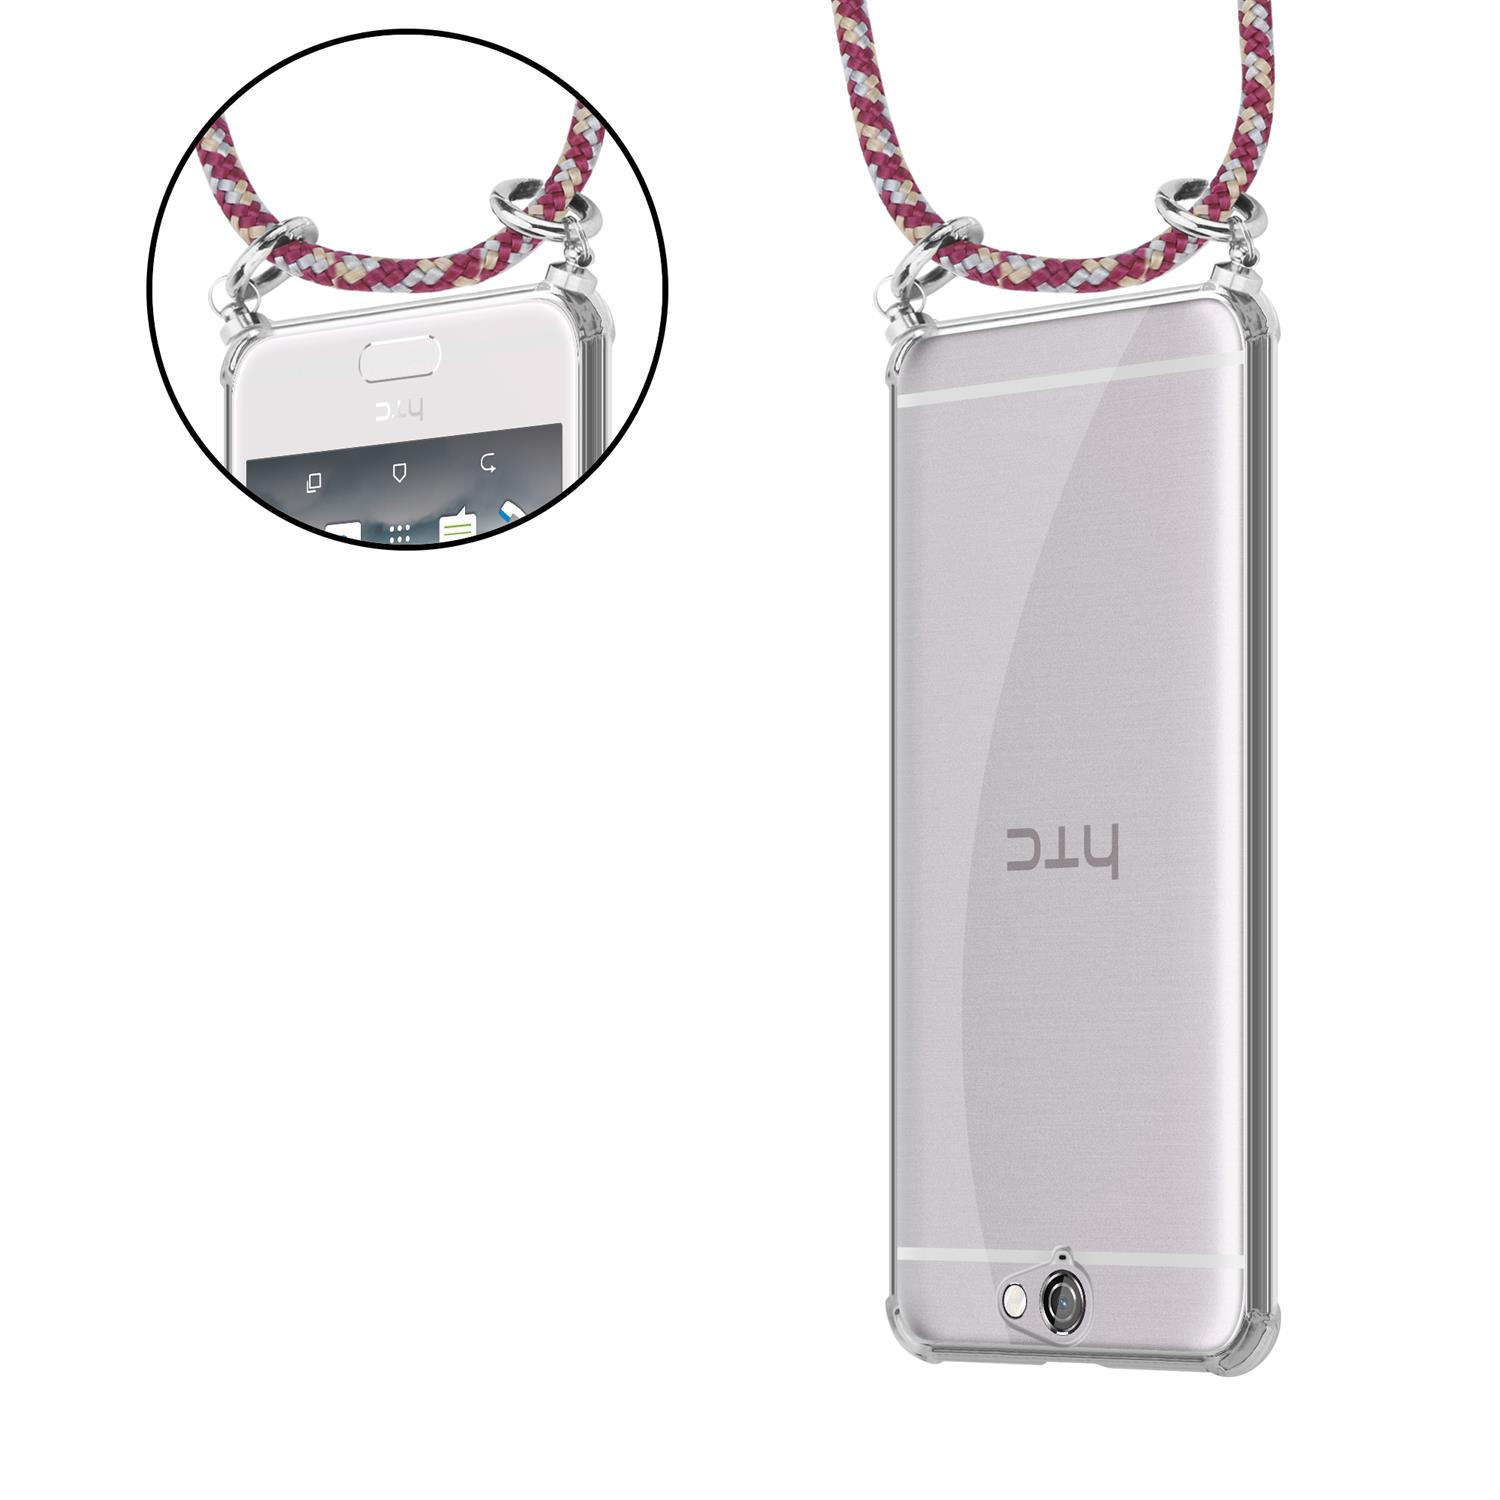 CADORABO Handy Kette mit Silber Ringen, abnehmbarer Band HTC, WEIß ROT Backcover, Hülle, ONE A9, GELB Kordel und